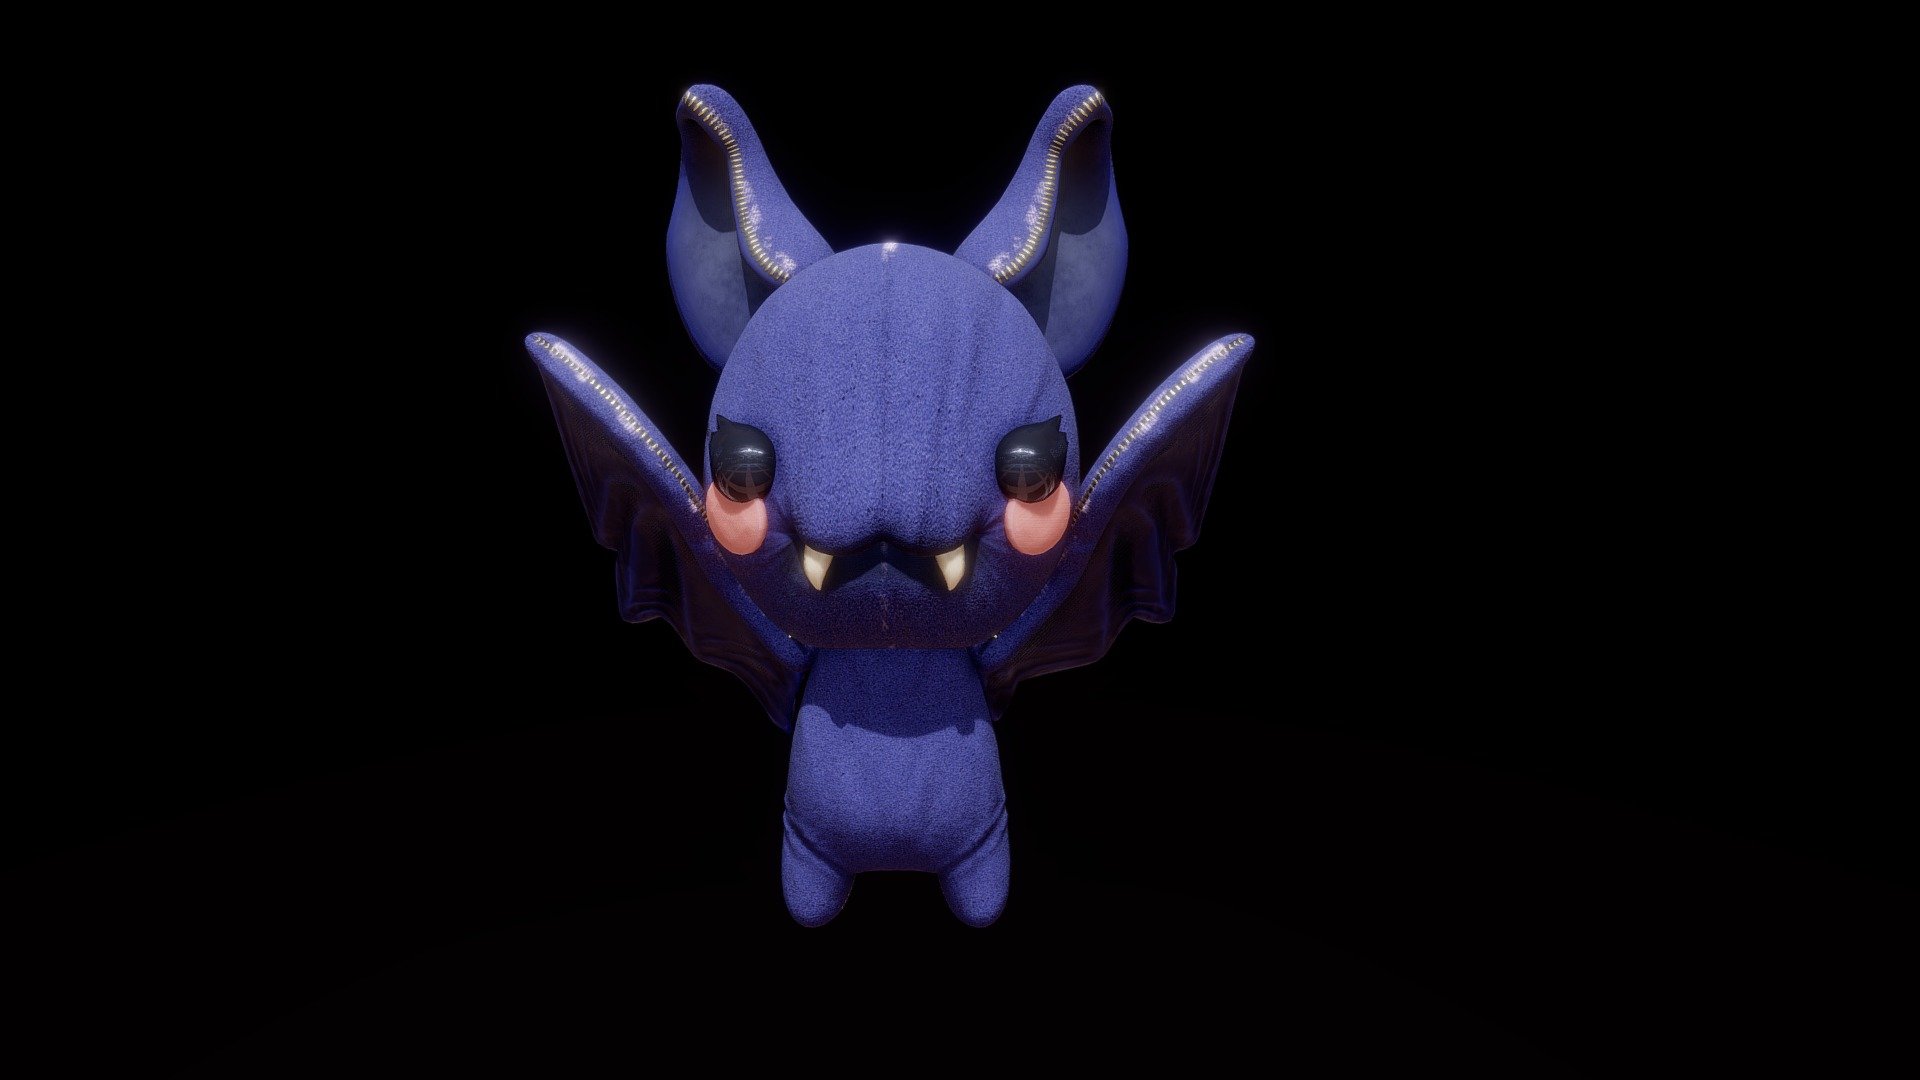 High Detailed 3D model of a Scary Plushie Bat  with 3 animations - fly,attack(suck life essence),die

1.Fbx file - universal for importing &amp; exporting animated 3D models

2.Blend file - For editing or adding new animations

3.Unitypackage - file with prefab ready for game

4.PBR 8K maps - resize them as you want - Animated Game-Ready Character - Scary Bat - Buy Royalty Free 3D model by mahrcheen 3d model